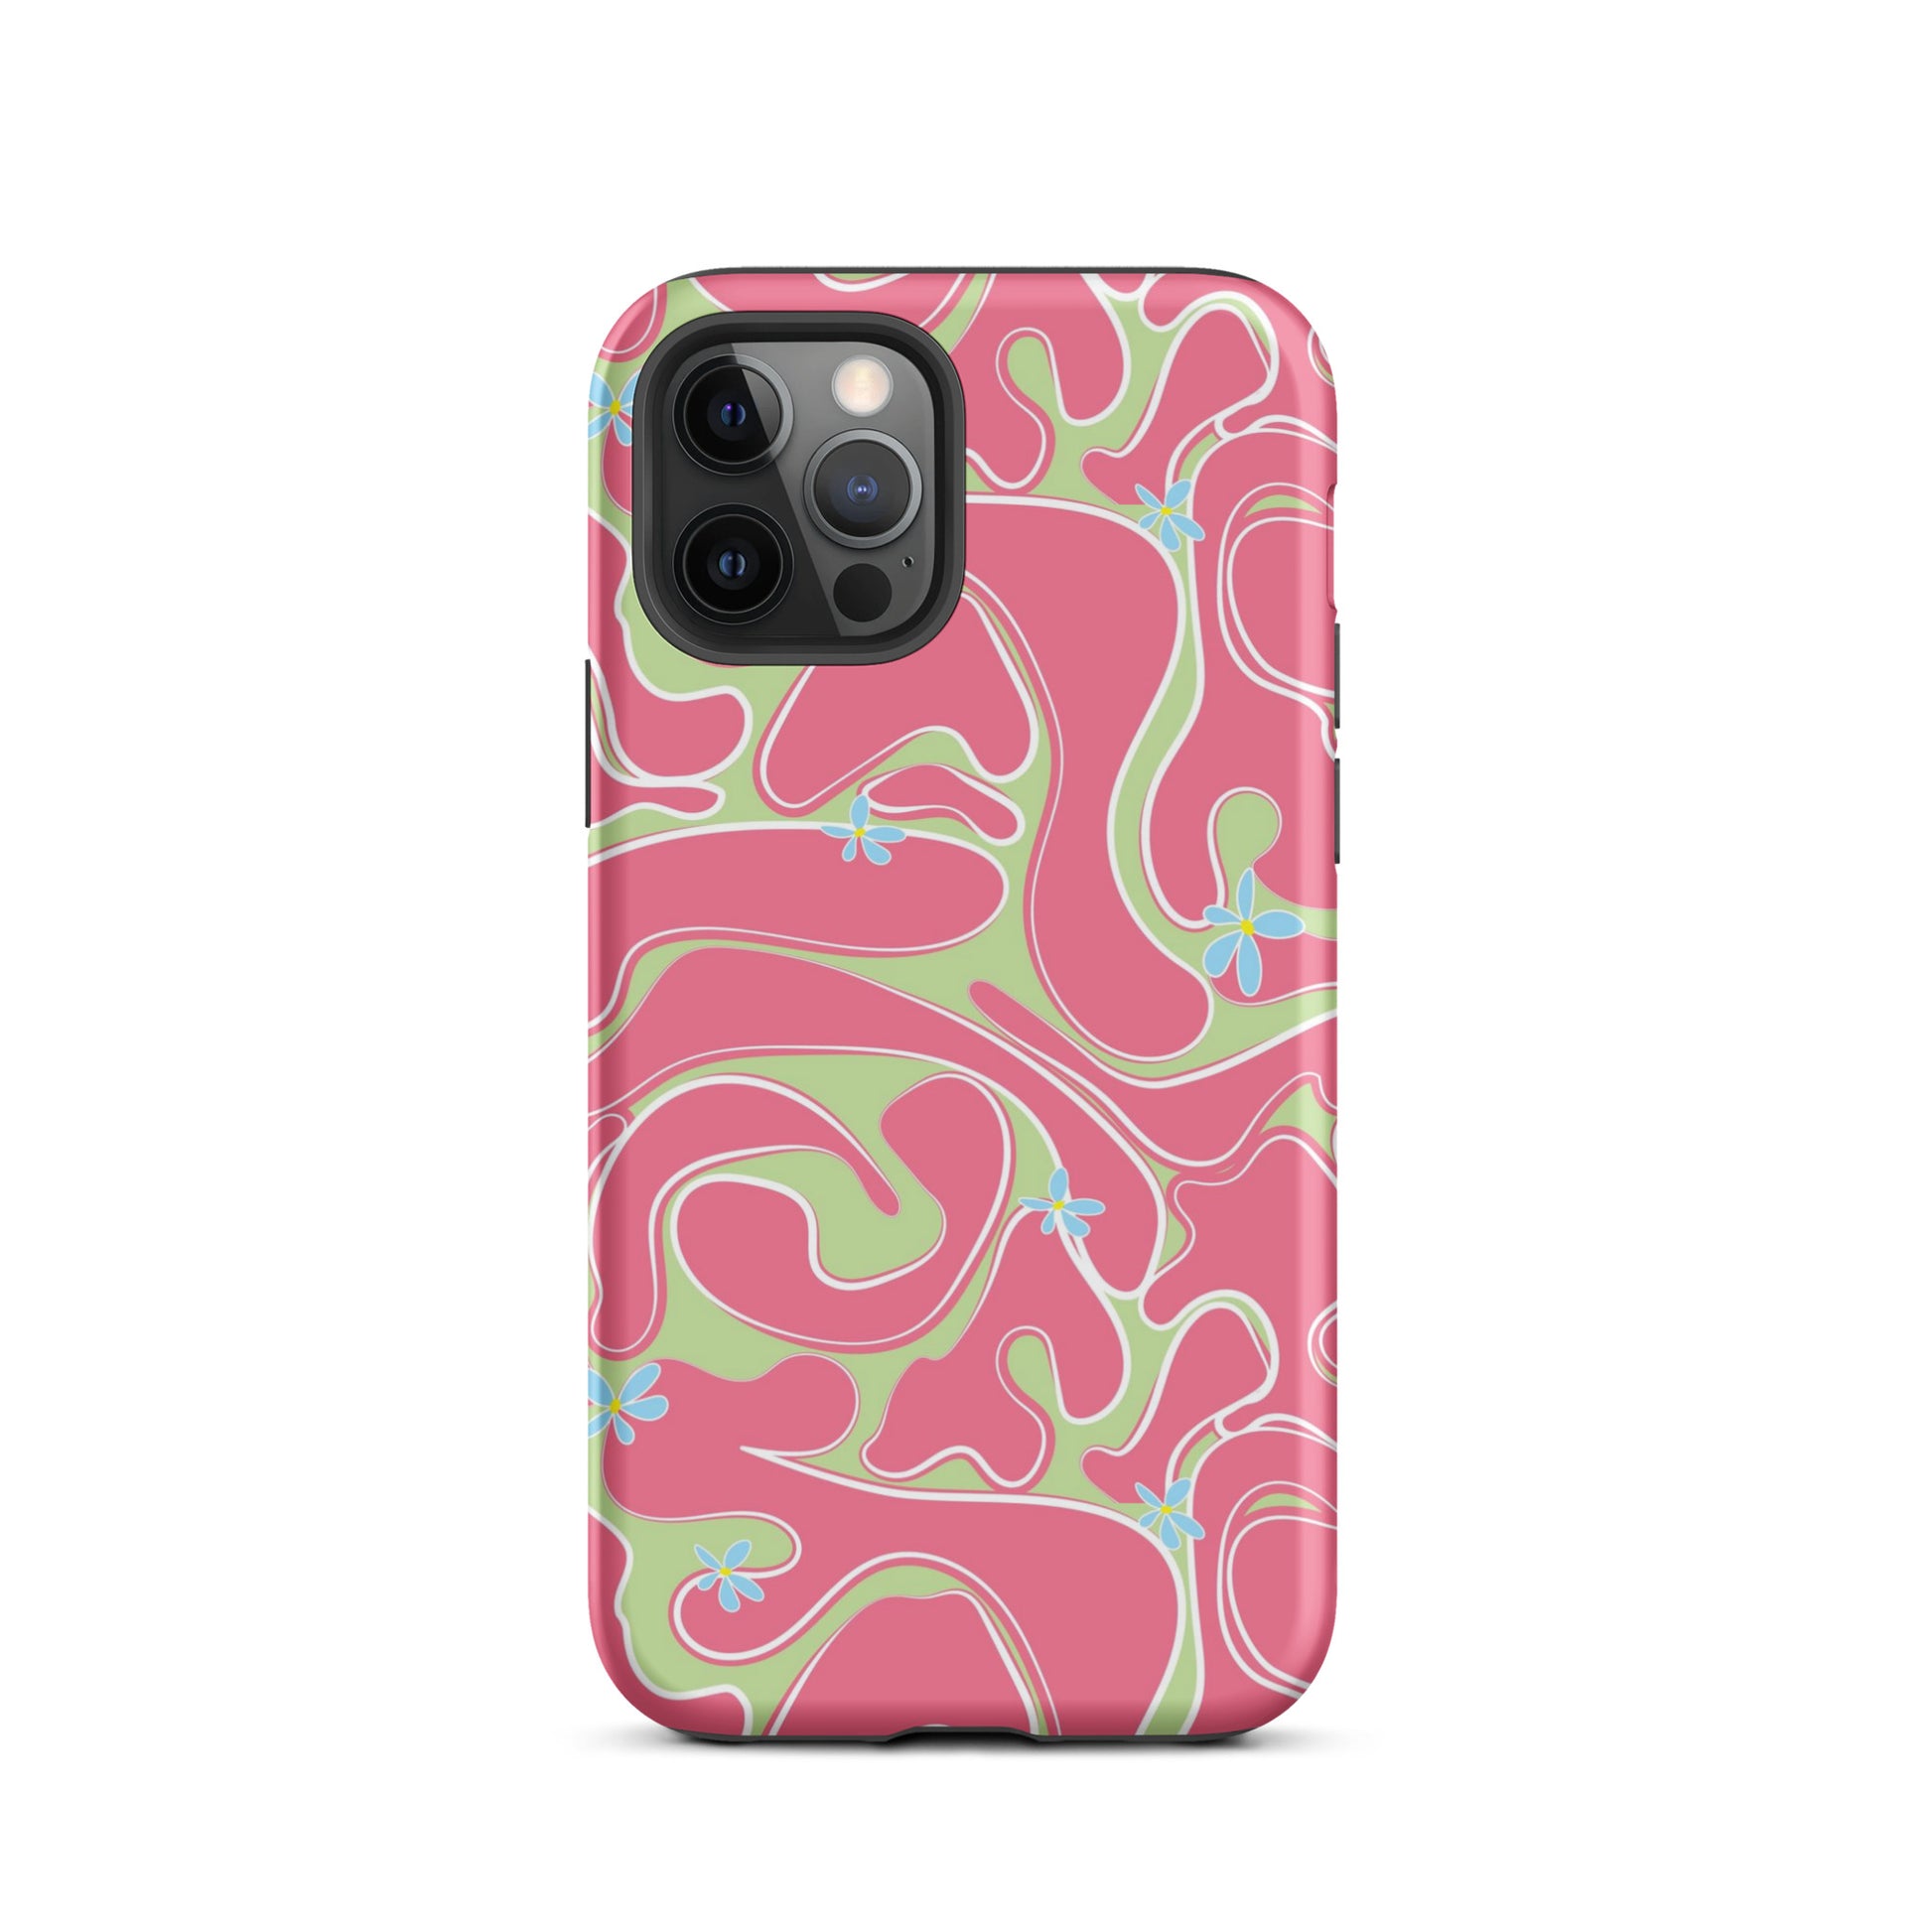 Reef Waves iPhone Case Matte iPhone 12 Pro